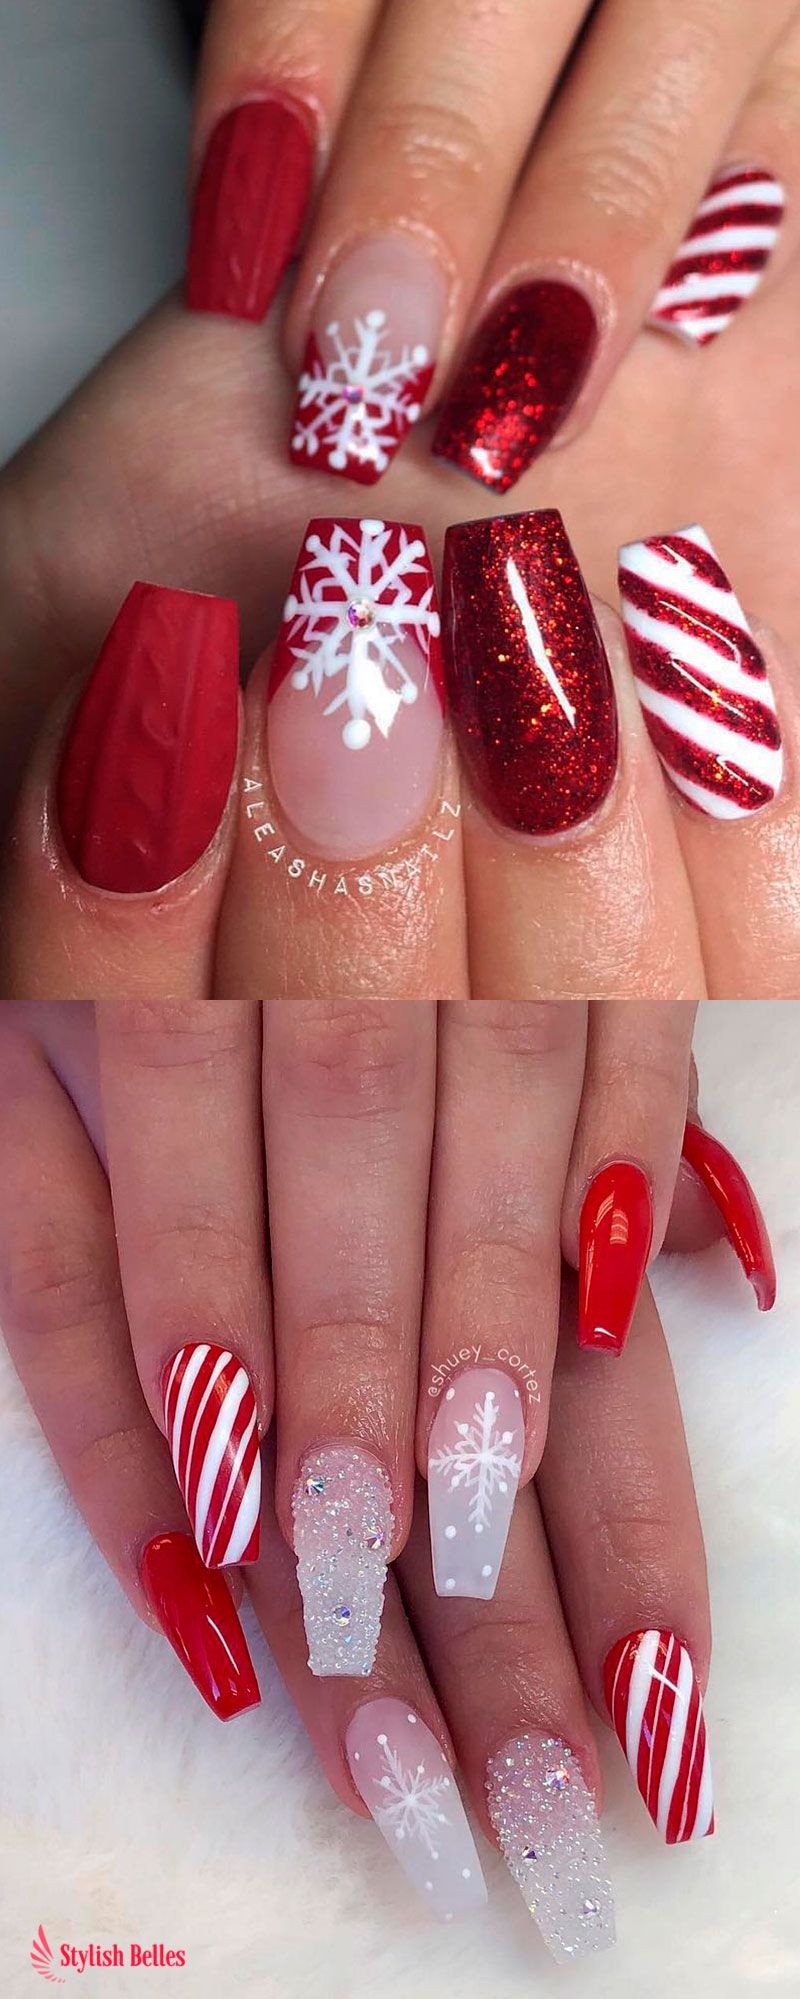 I Love Those Red Christmas Nails Christmasnails Christmasnailart Christmasnaildesign Christmas201 Red Christmas Nails Chistmas Nails Cute Christmas Nails